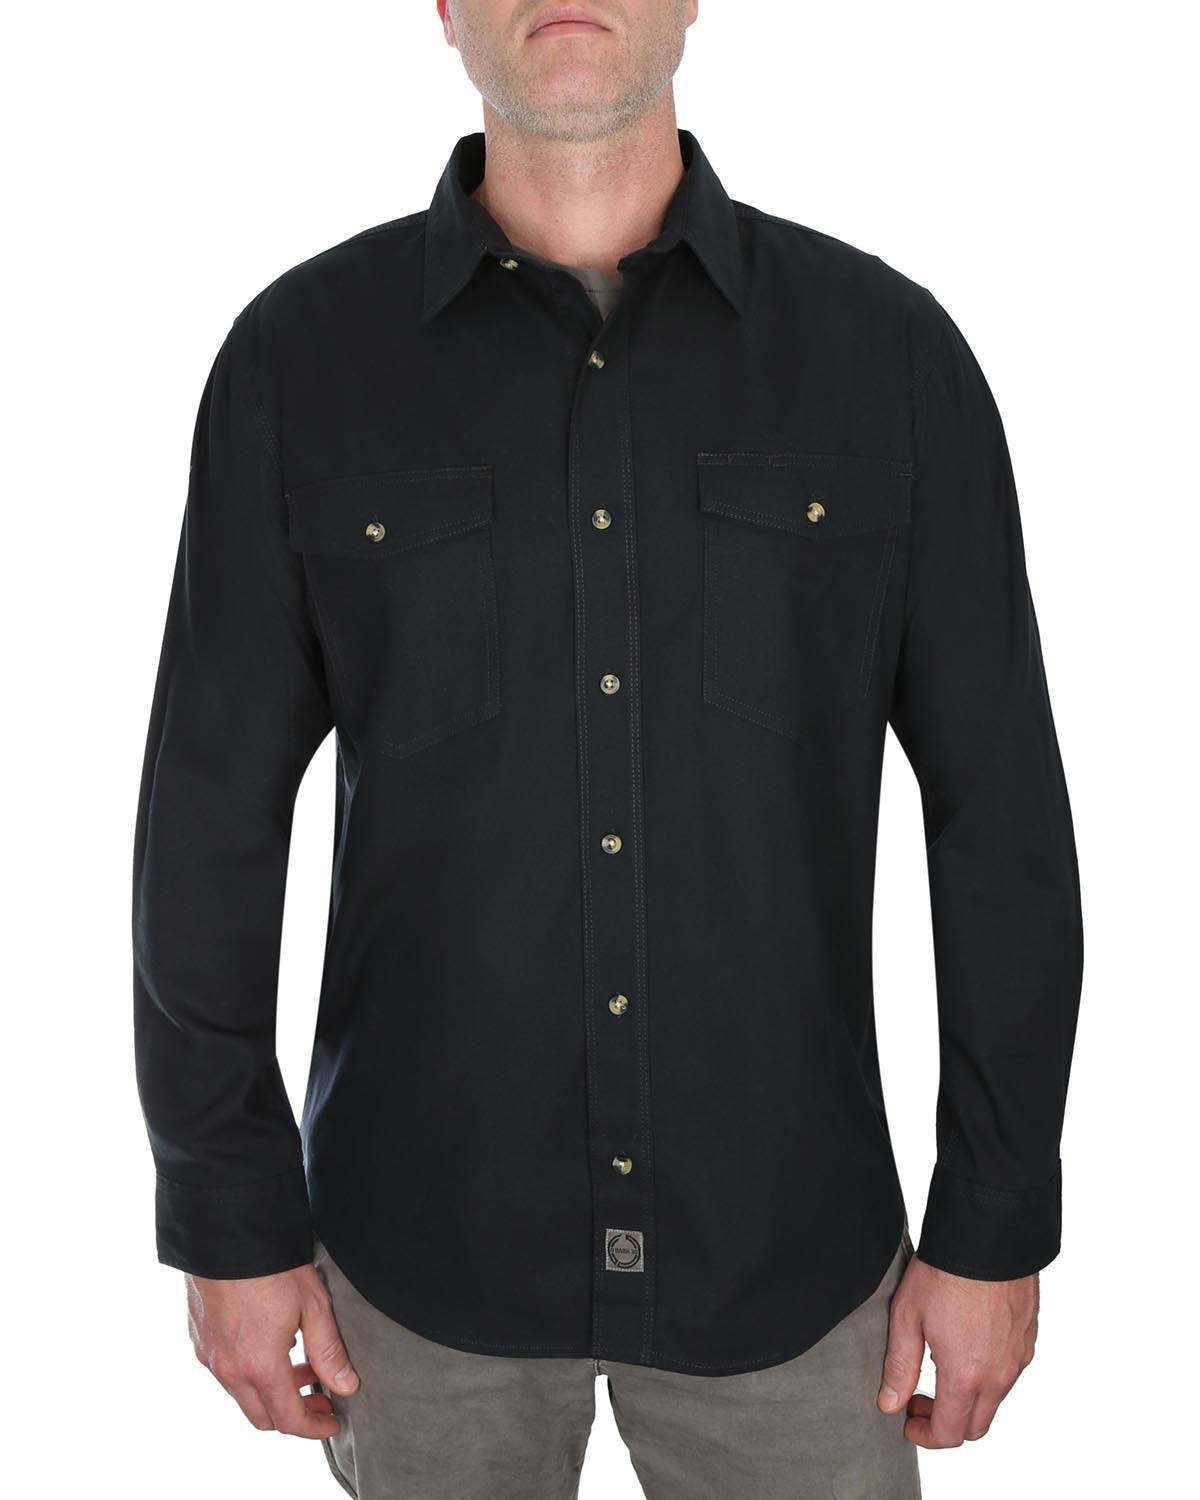 FOREMAN LONG SLEEVE BUTTON-UP IN BLACK – O Dark 30